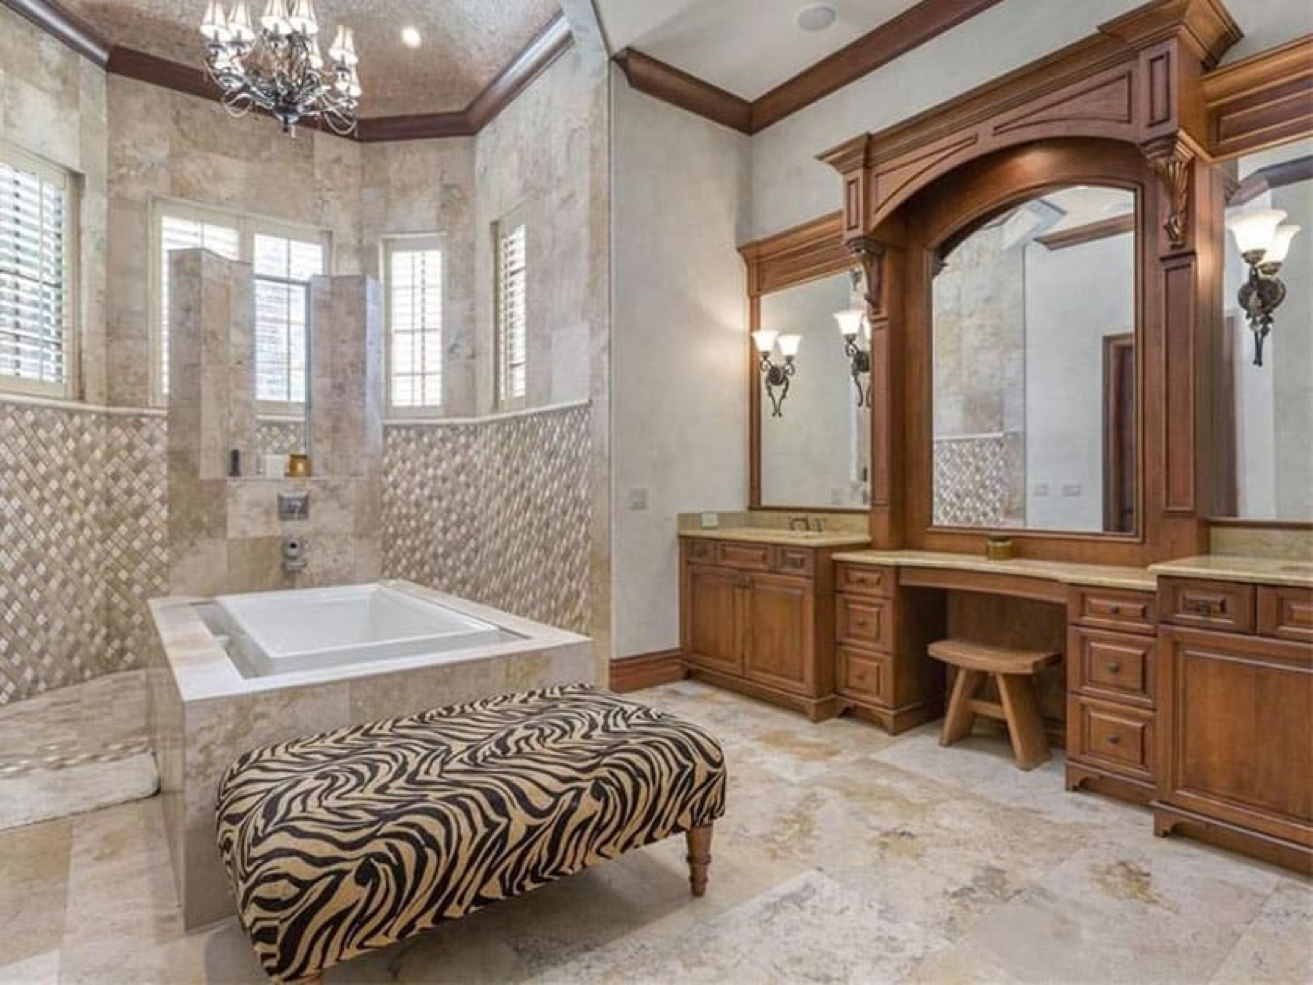 This craftsman bathroom has a unique layout, featuring an open shower are which is directly connected to the square bathtub in the middle